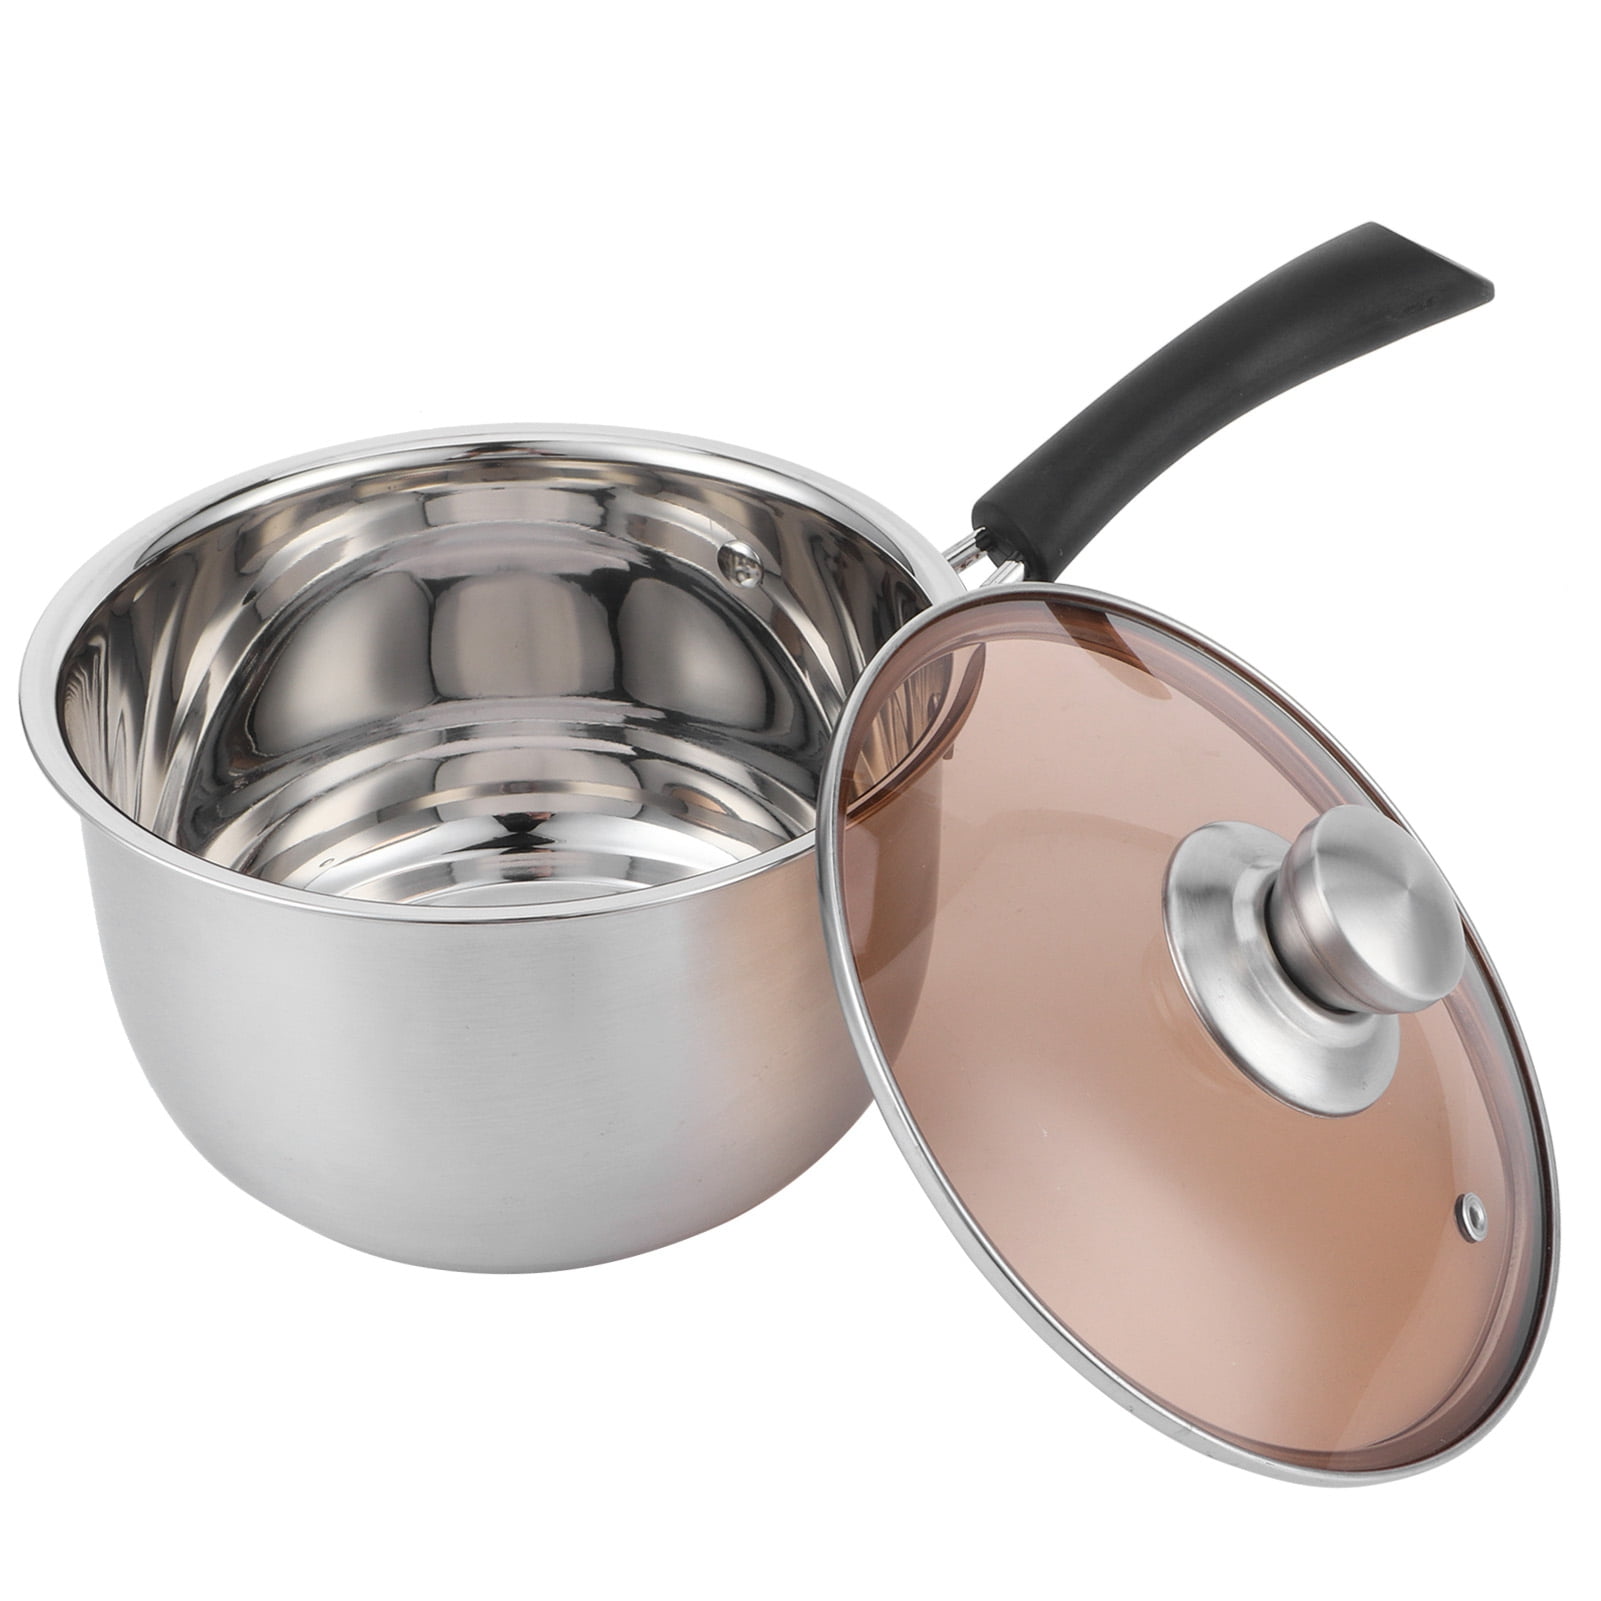 GUONING-L Large Cooking Pot with Lid,Stainless Steel Saucepans